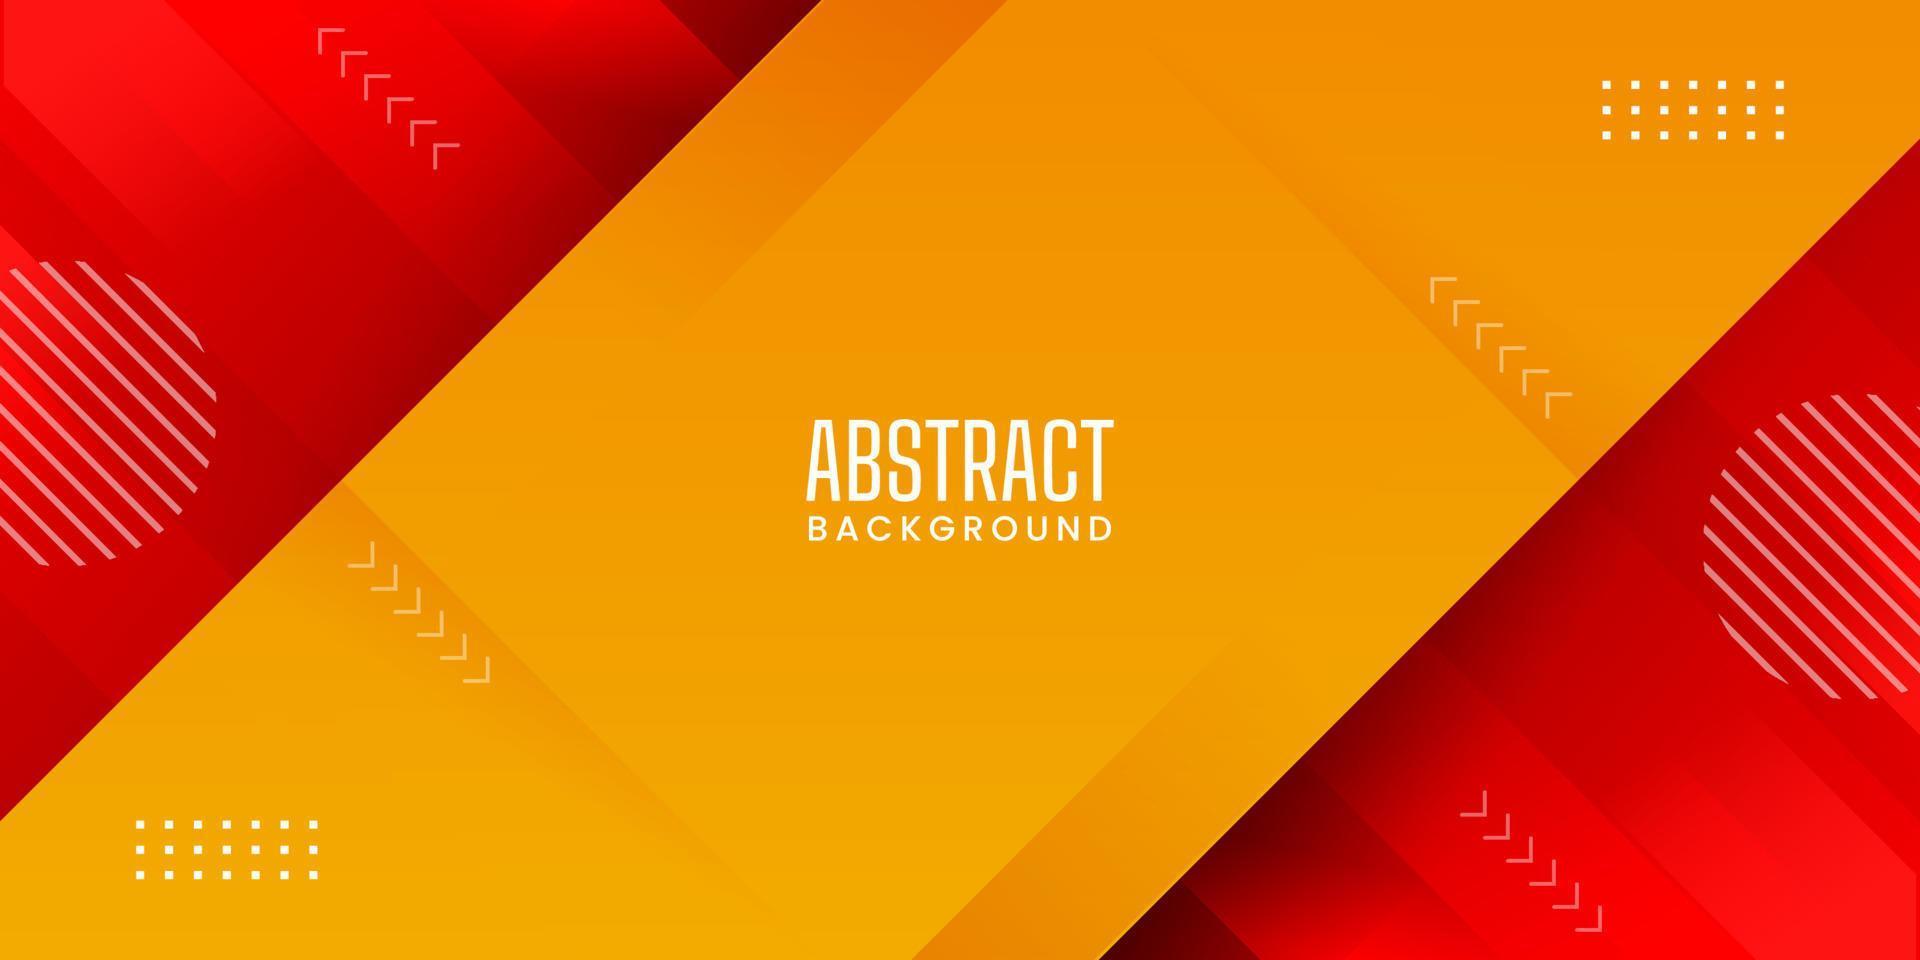 abstract geometric pattern background design with red and yellow to used in presentation, banner, poster, website, brochure vector